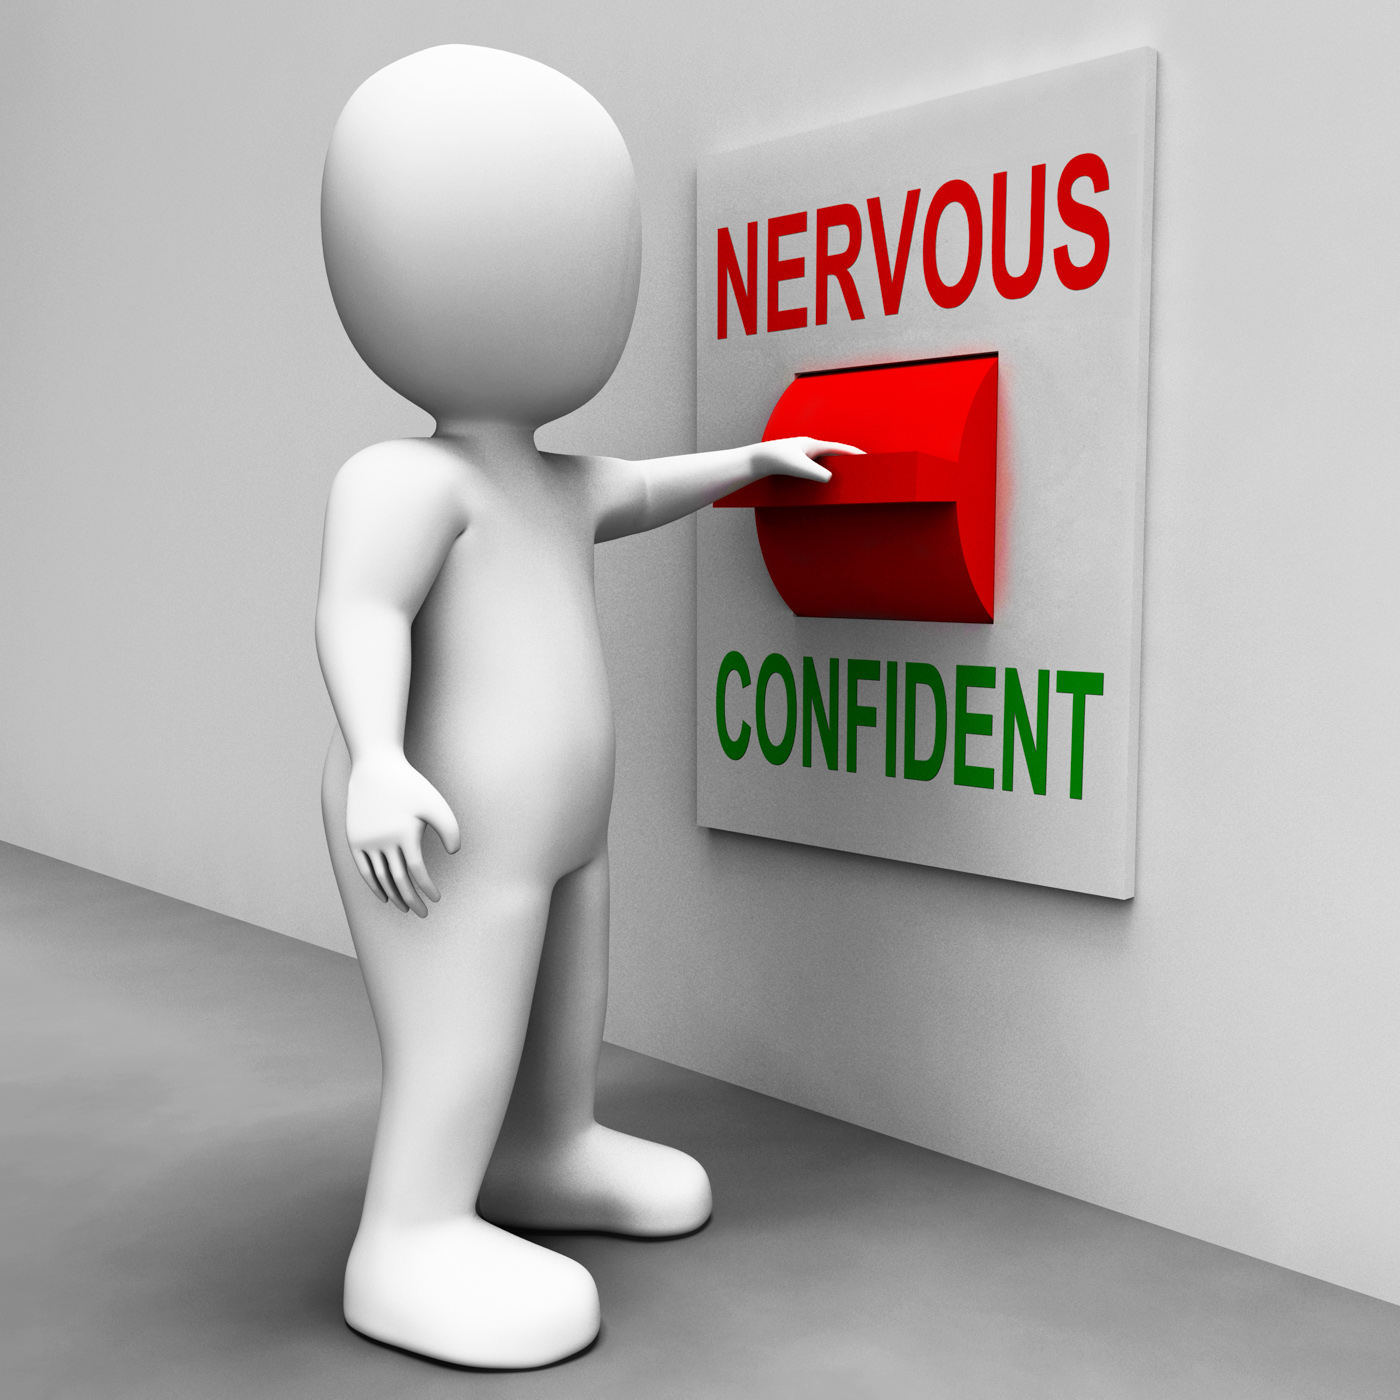 Nervous Confident Switch Shows Nerves Or Confidence, 3d, Afraid, Anxiety, Anxious, HQ Photo